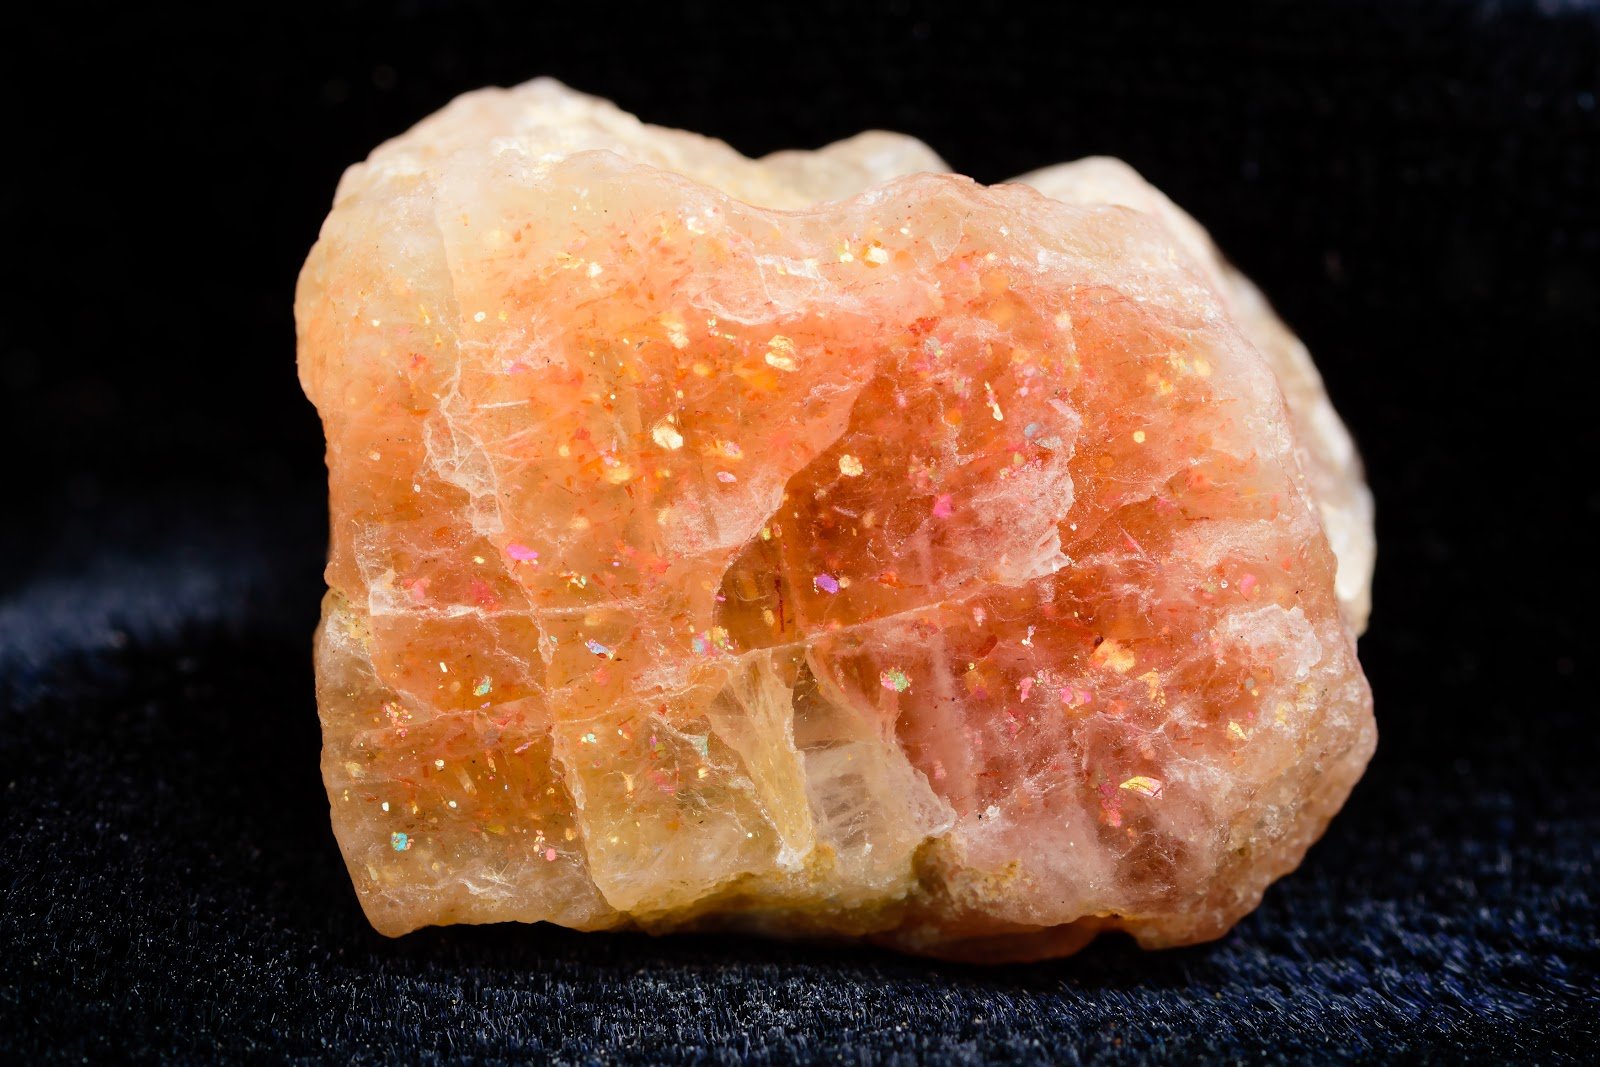 Sunstone Properties: How to Use This Crystal for Your Well-Being